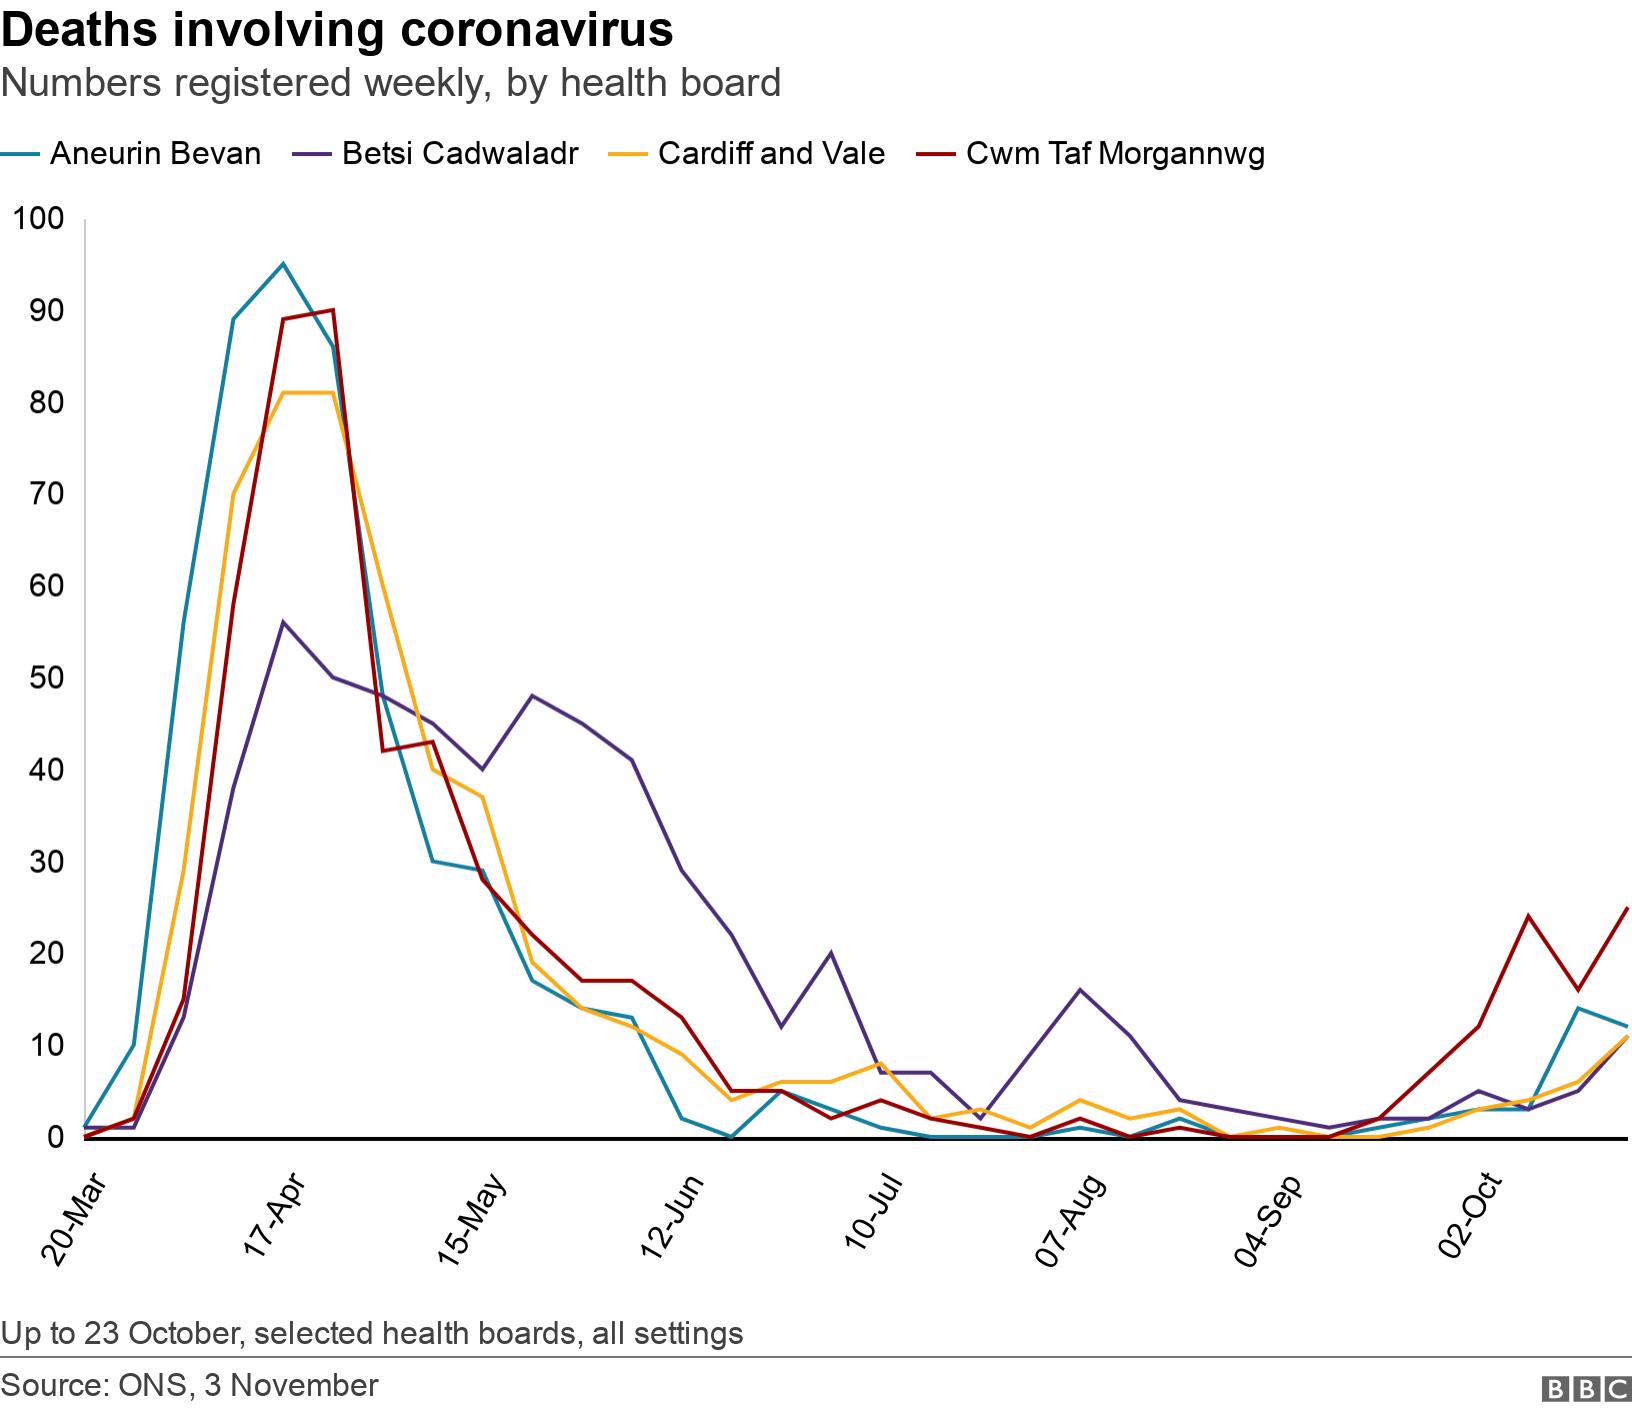 Deaths involving coronavirus. Numbers registered weekly, by health board. Up to 23 October, selected health boards, all settings.